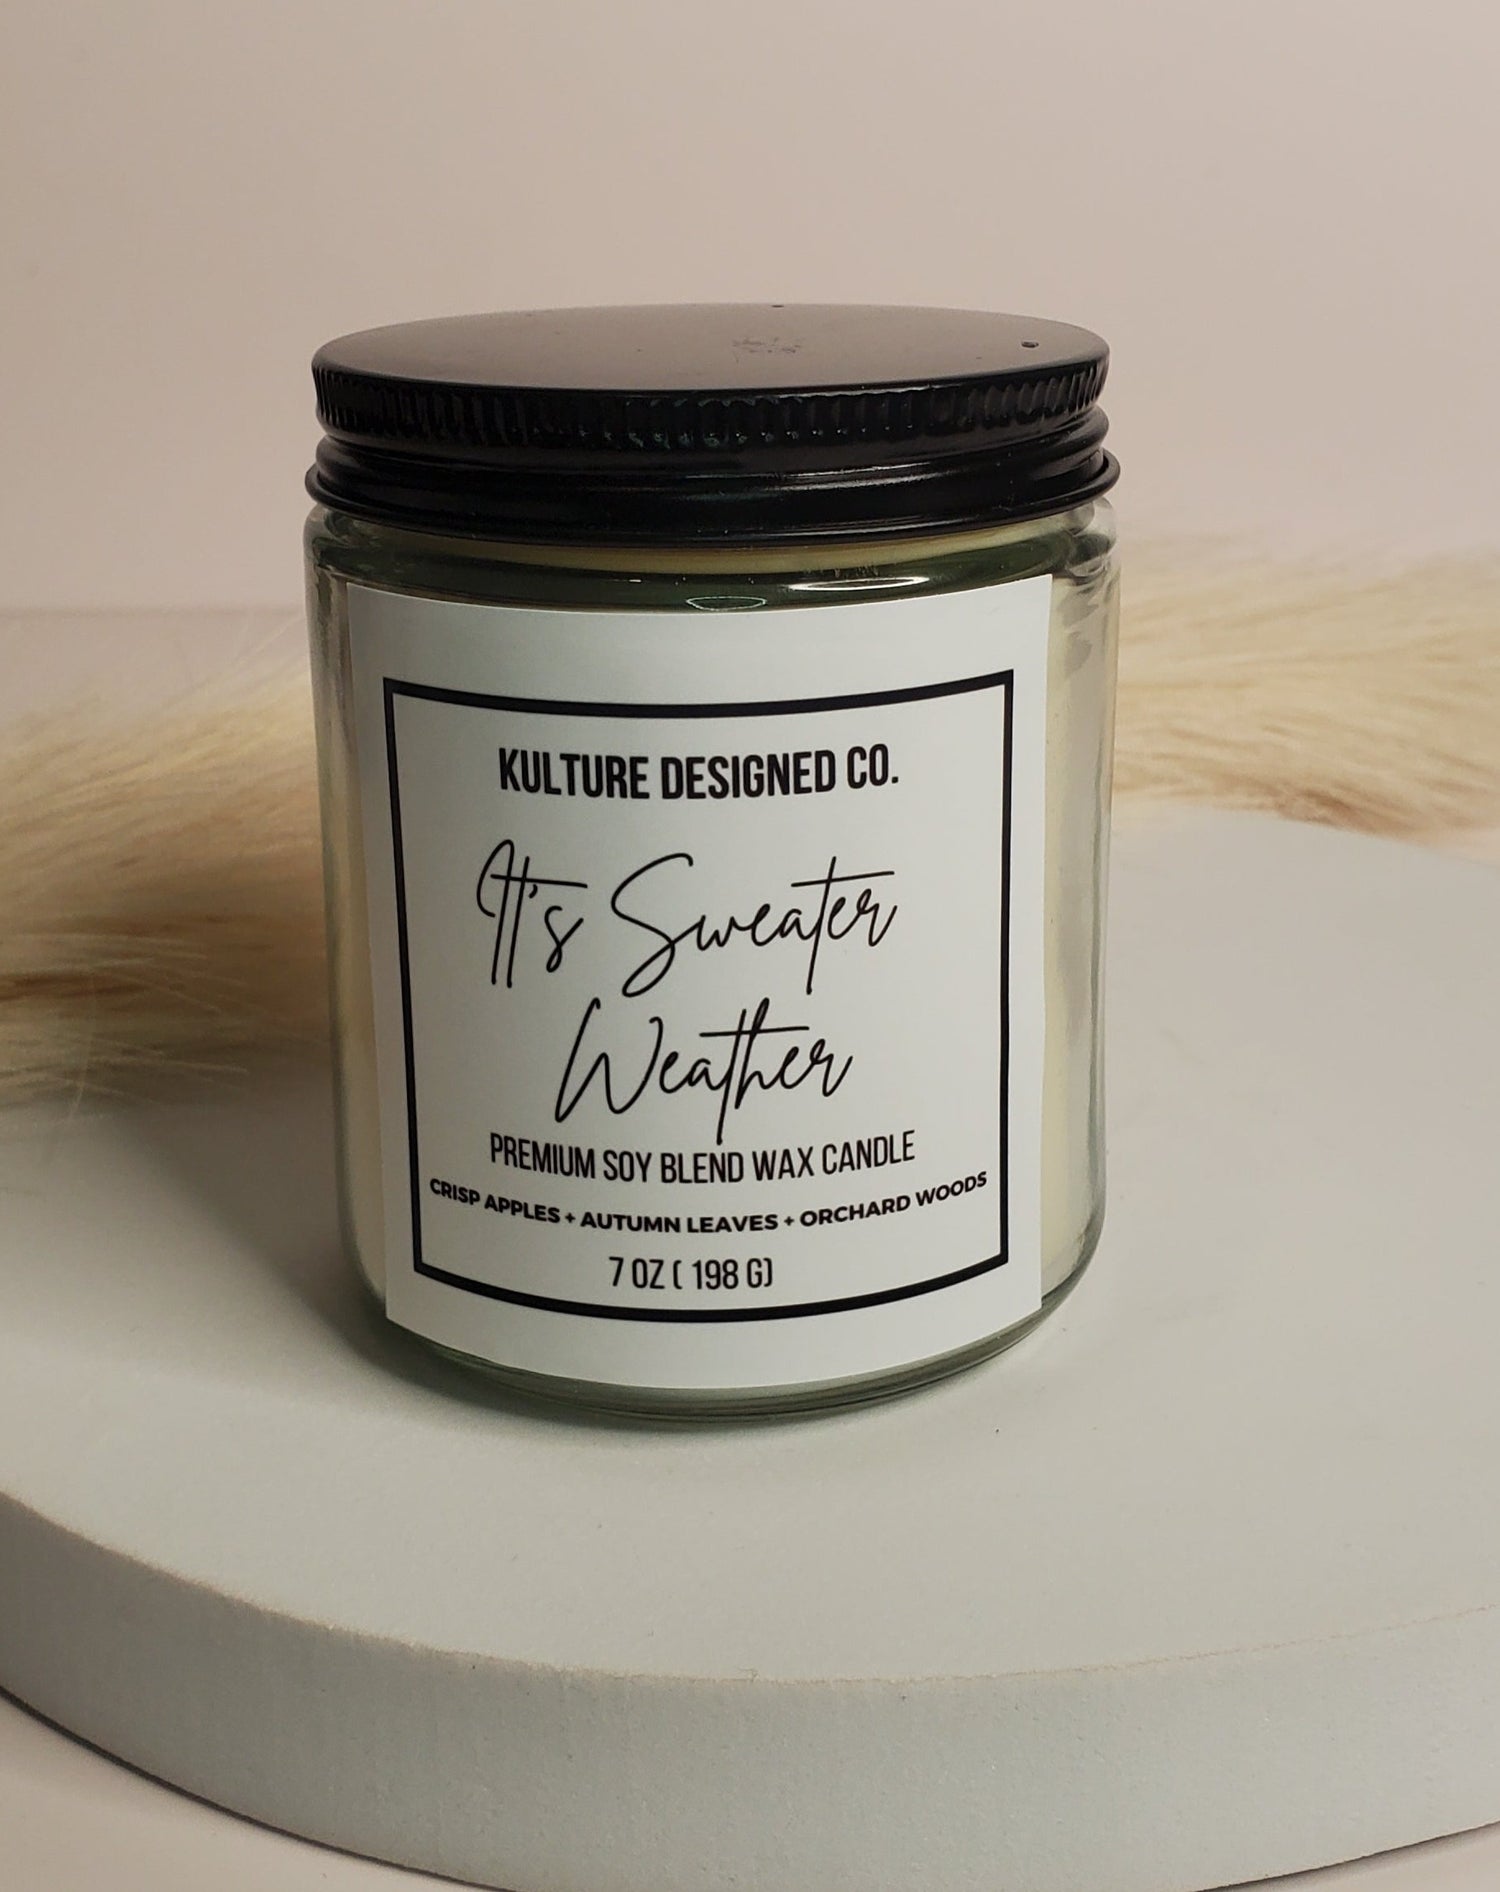 IT'S SWEATER WEATHER |  7 oz  Candle - Kulture Designed Co.